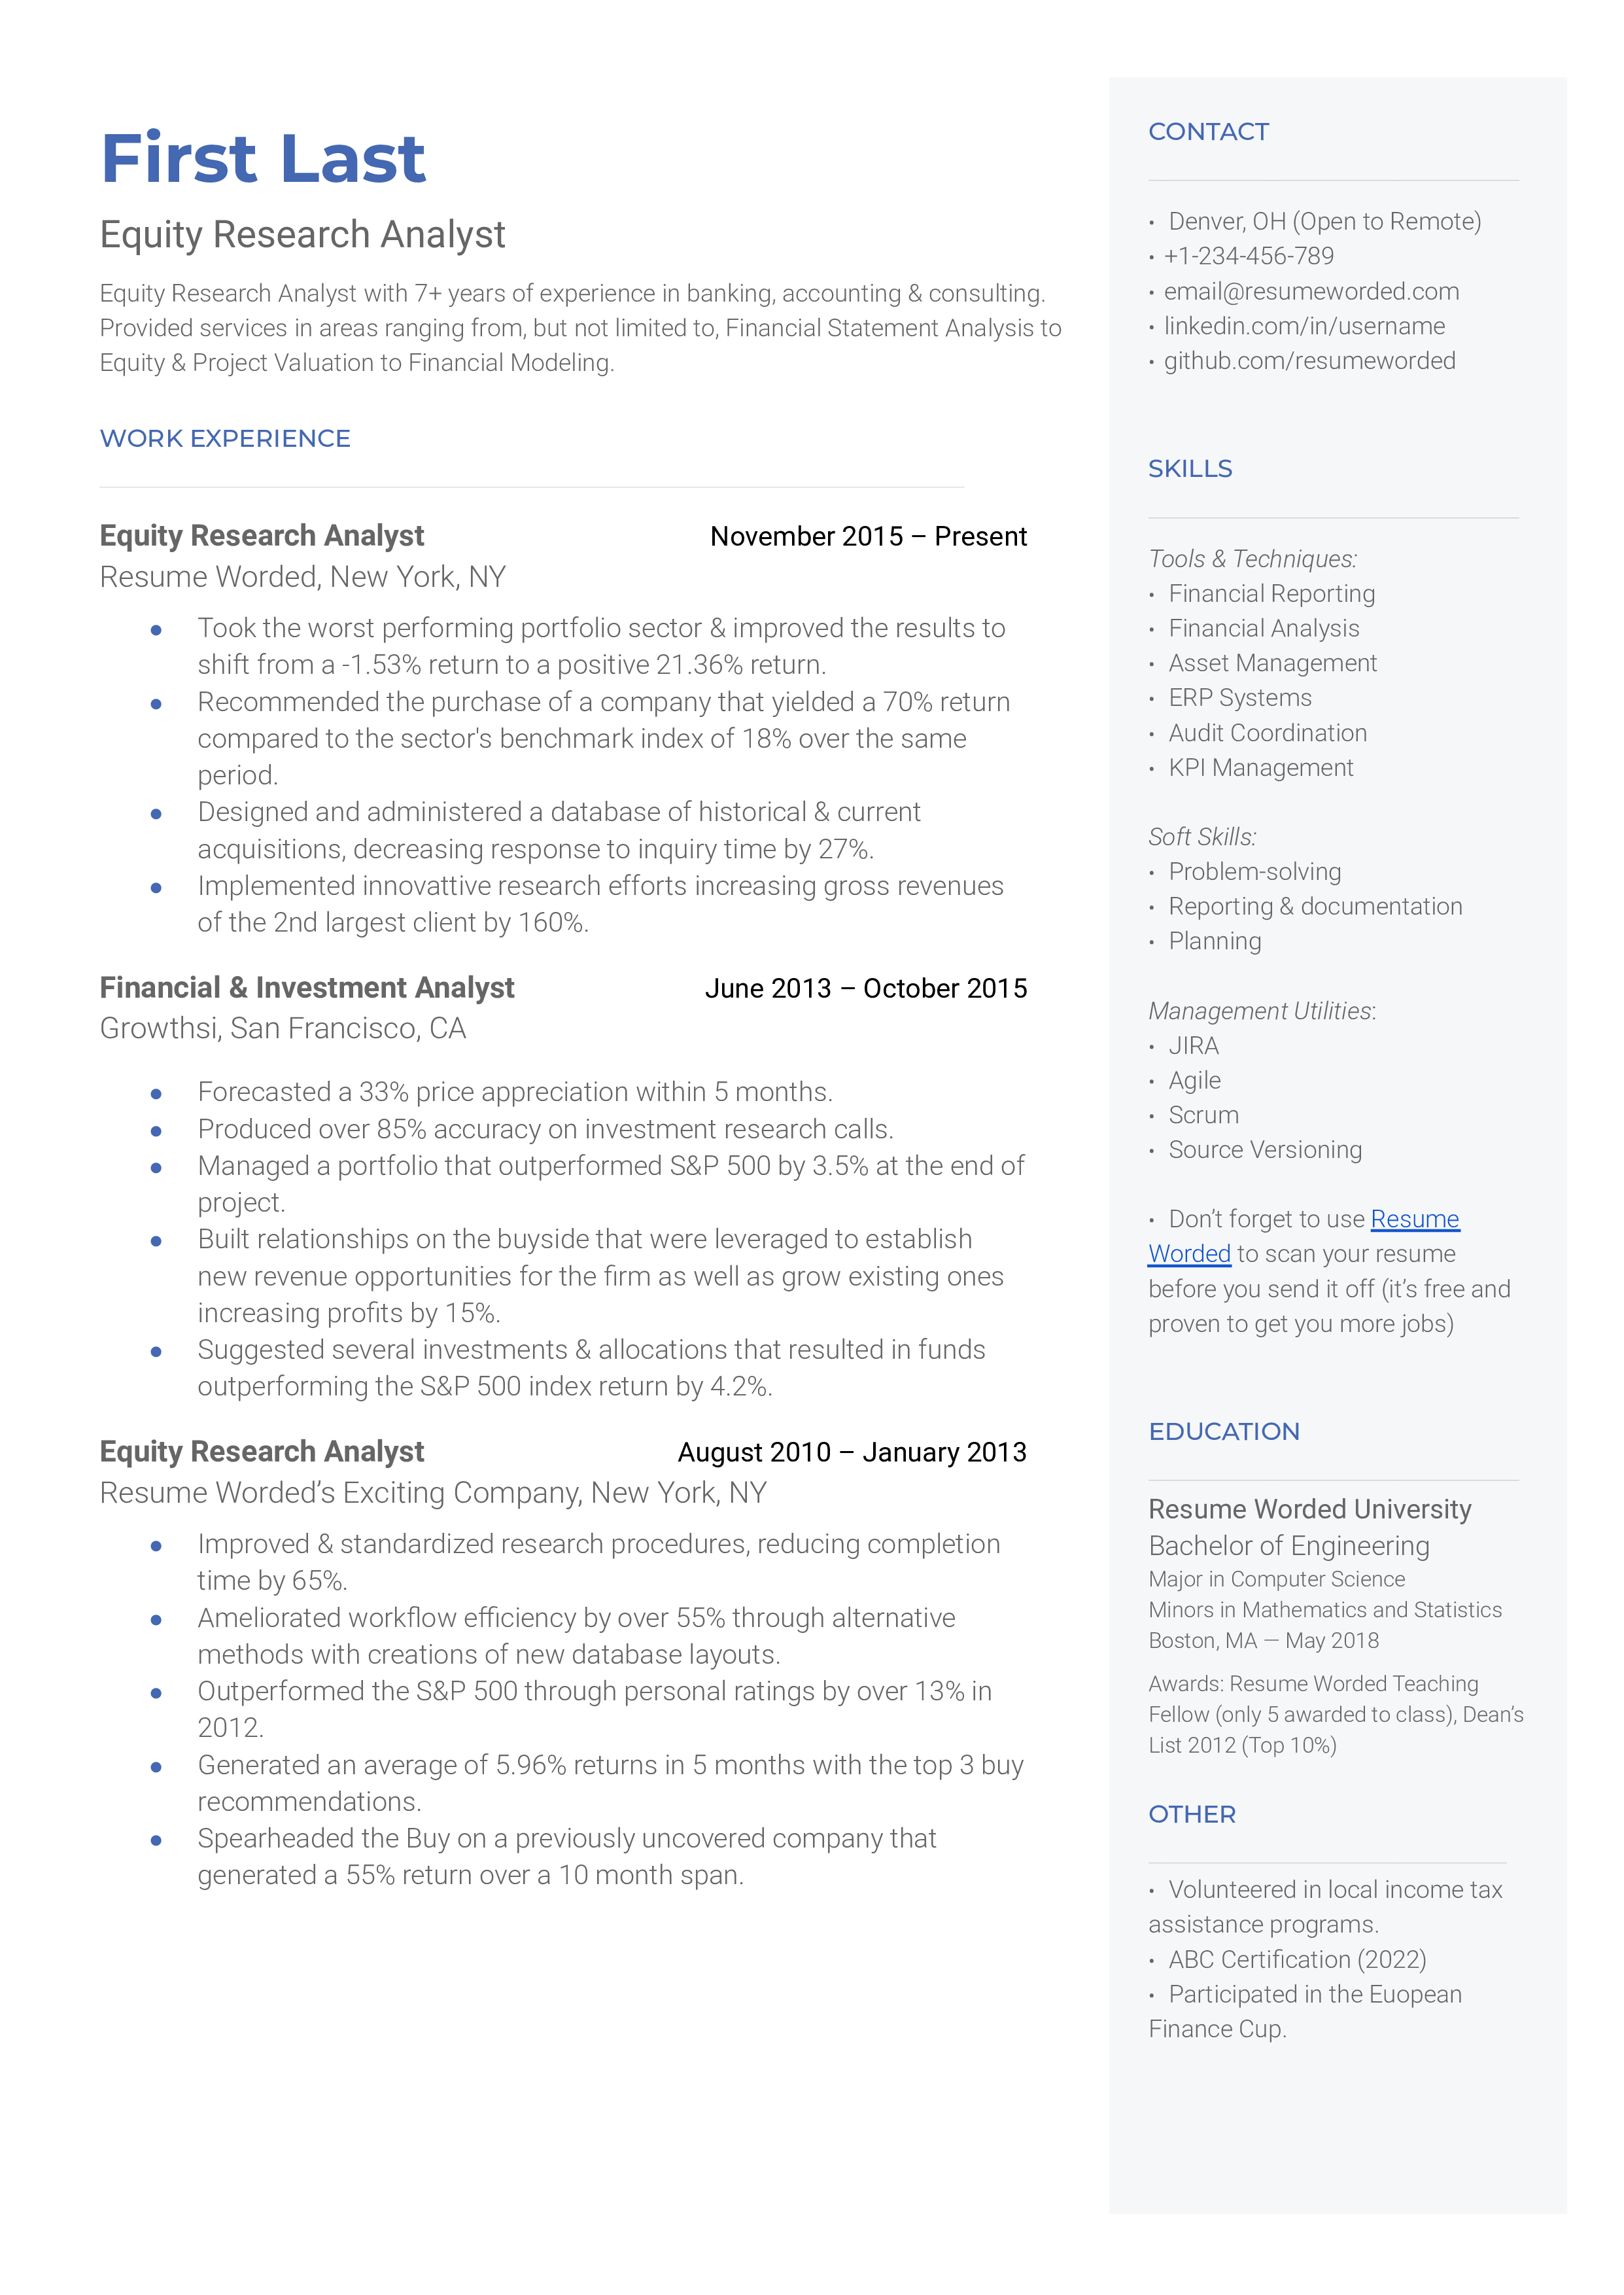 Equity Research Analyst Resume Template + Example